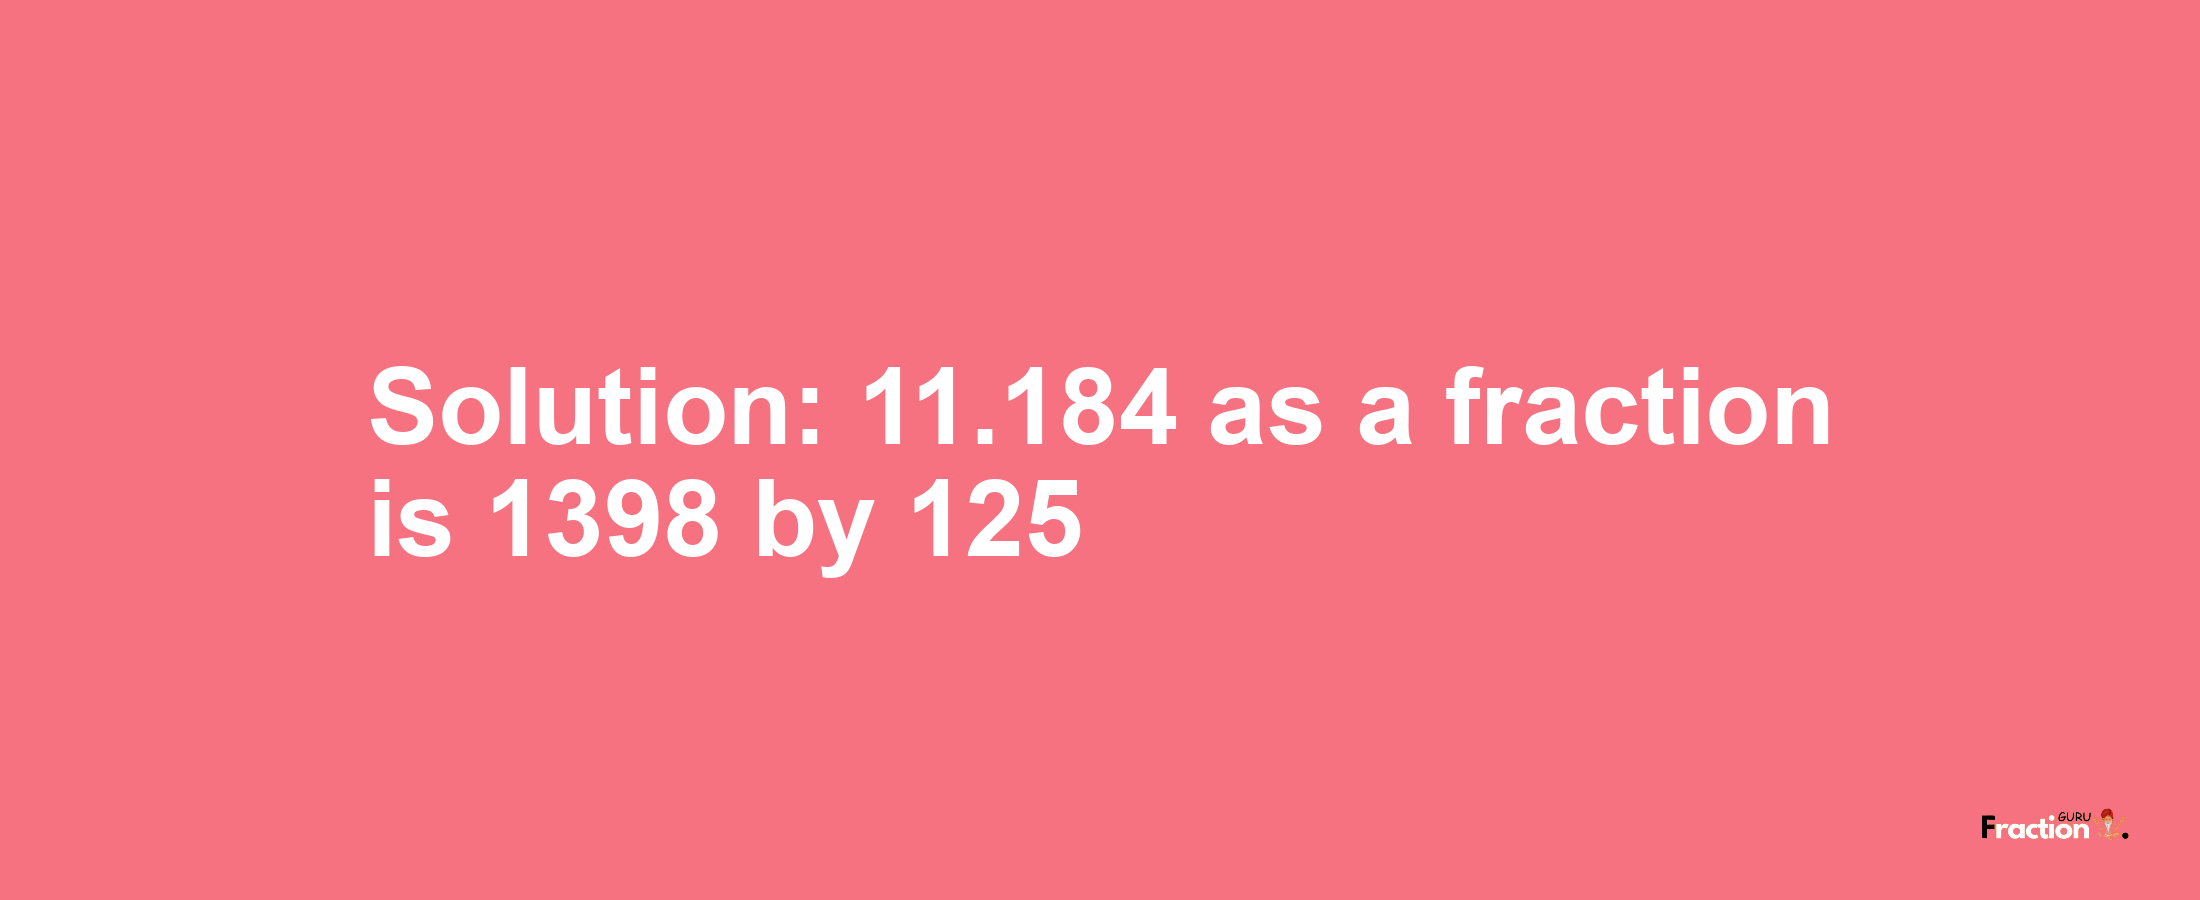 Solution:11.184 as a fraction is 1398/125